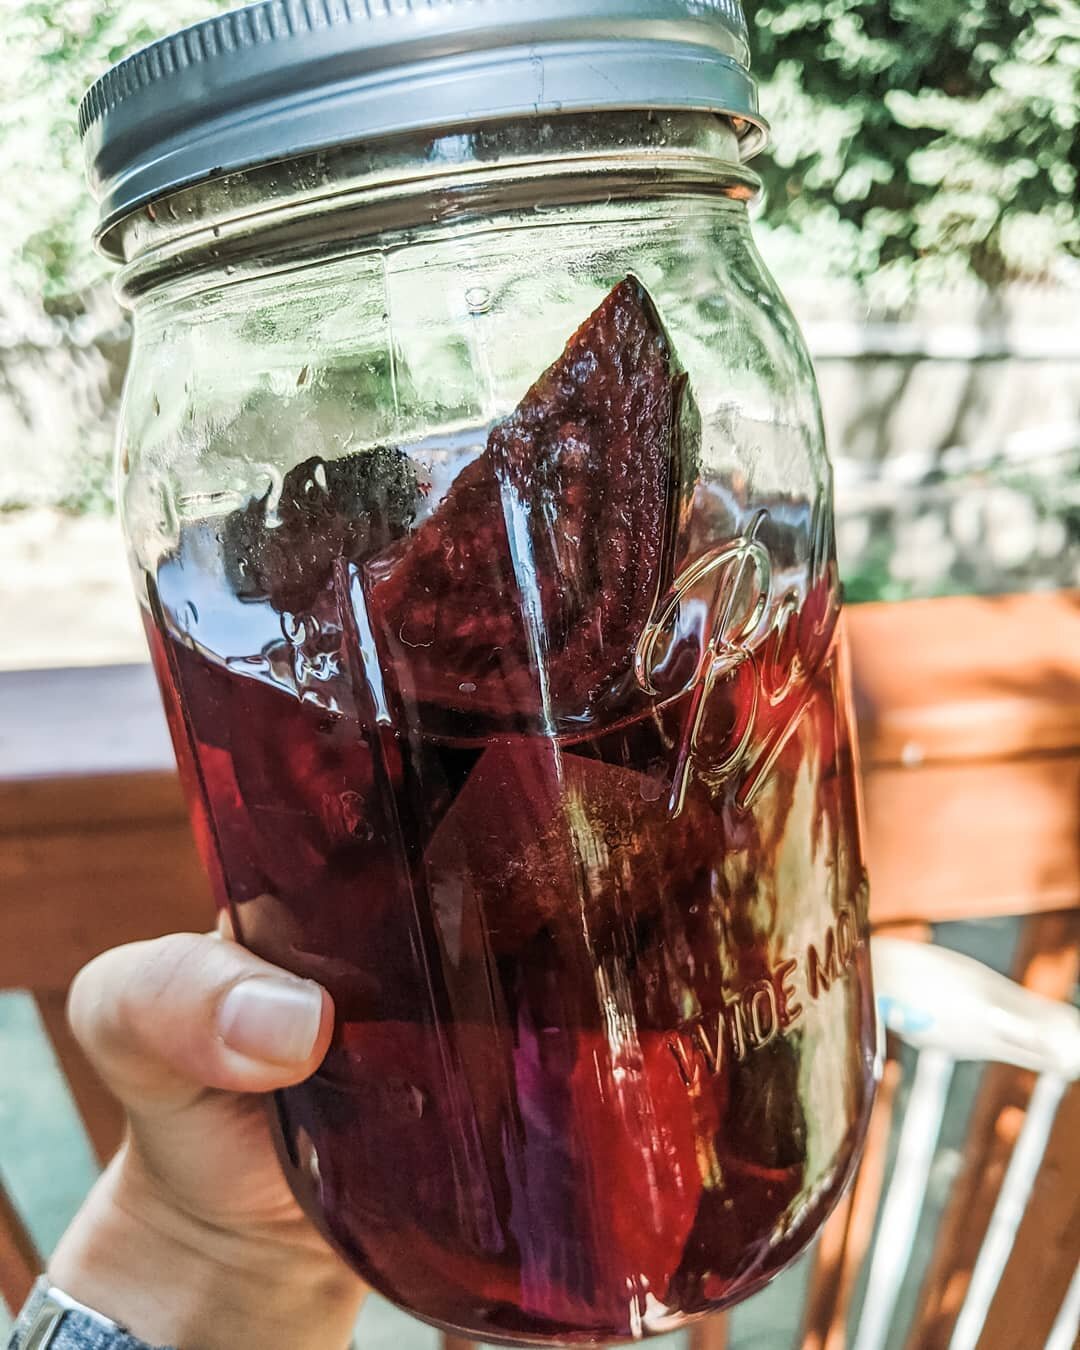 It's that time of year....time to start canning and fermenting all that the amazing goodies the local fall harvest has to offer to help keep my immunity and gut strong all winter long! ✨
.
Beet Kvass is one of my favorite tonics to drink throughout t